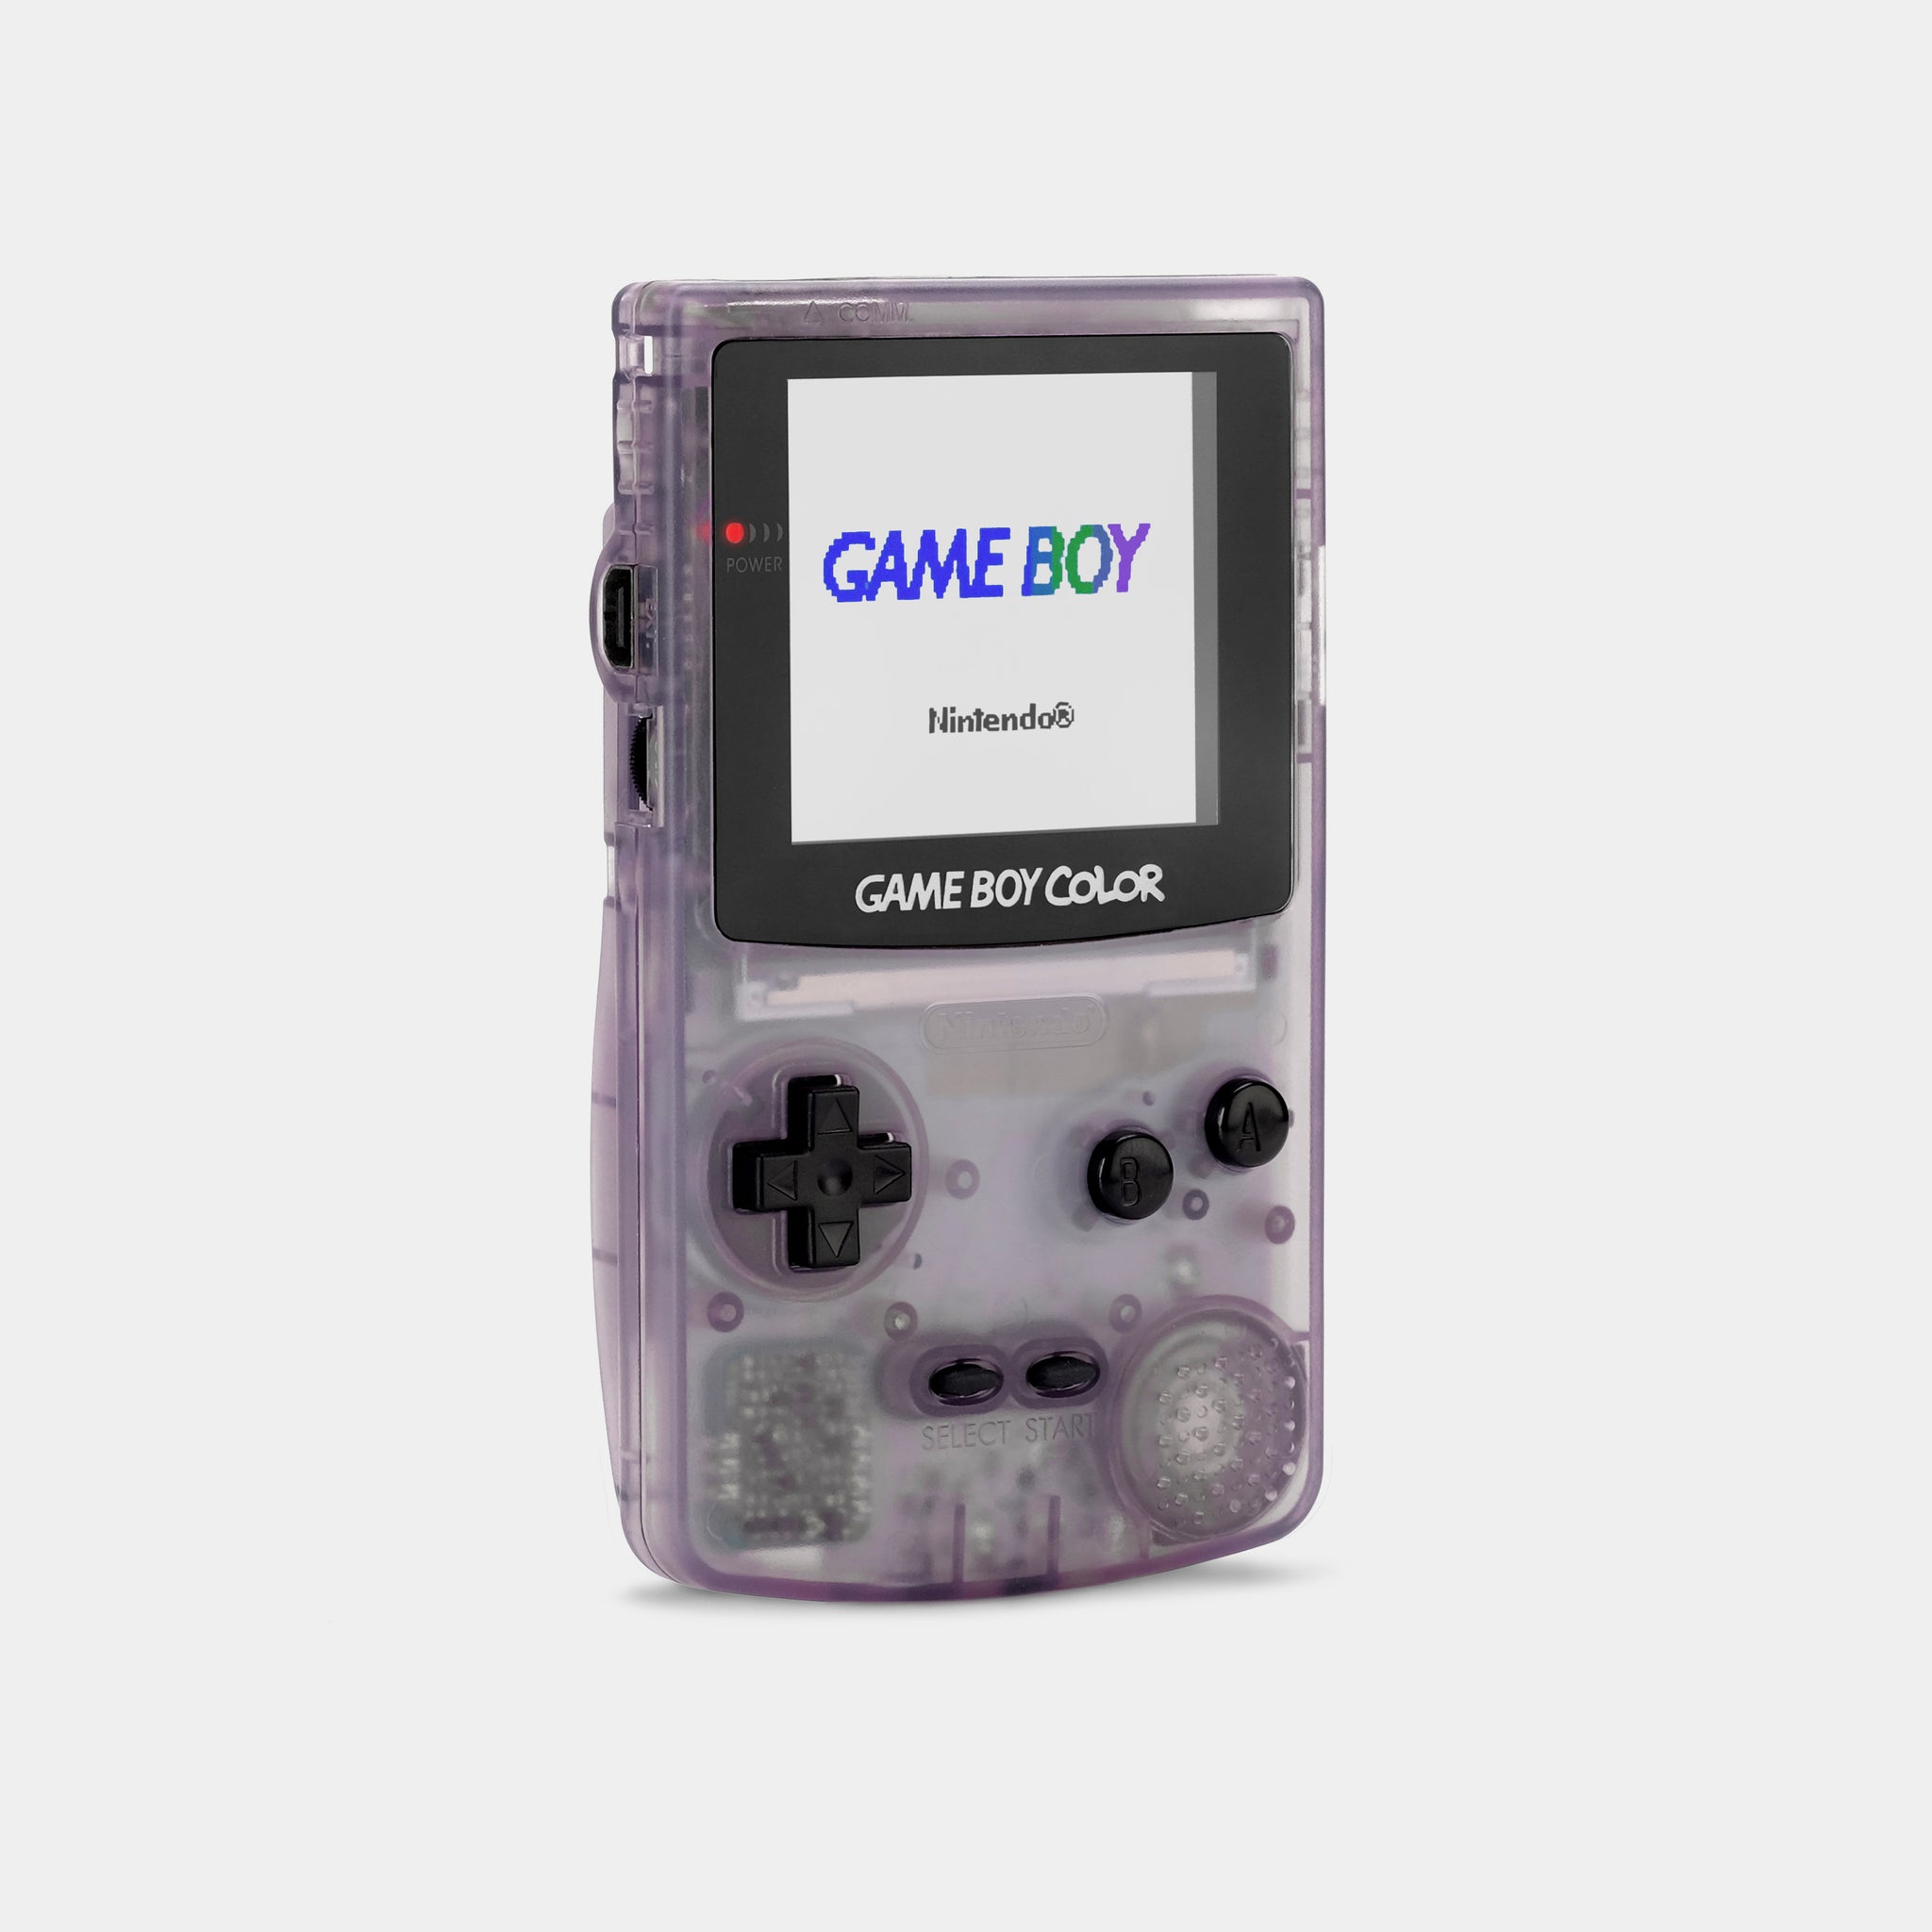 Nintendo Gameboy Game Boy Color Console (Atomic Purple) (Used)